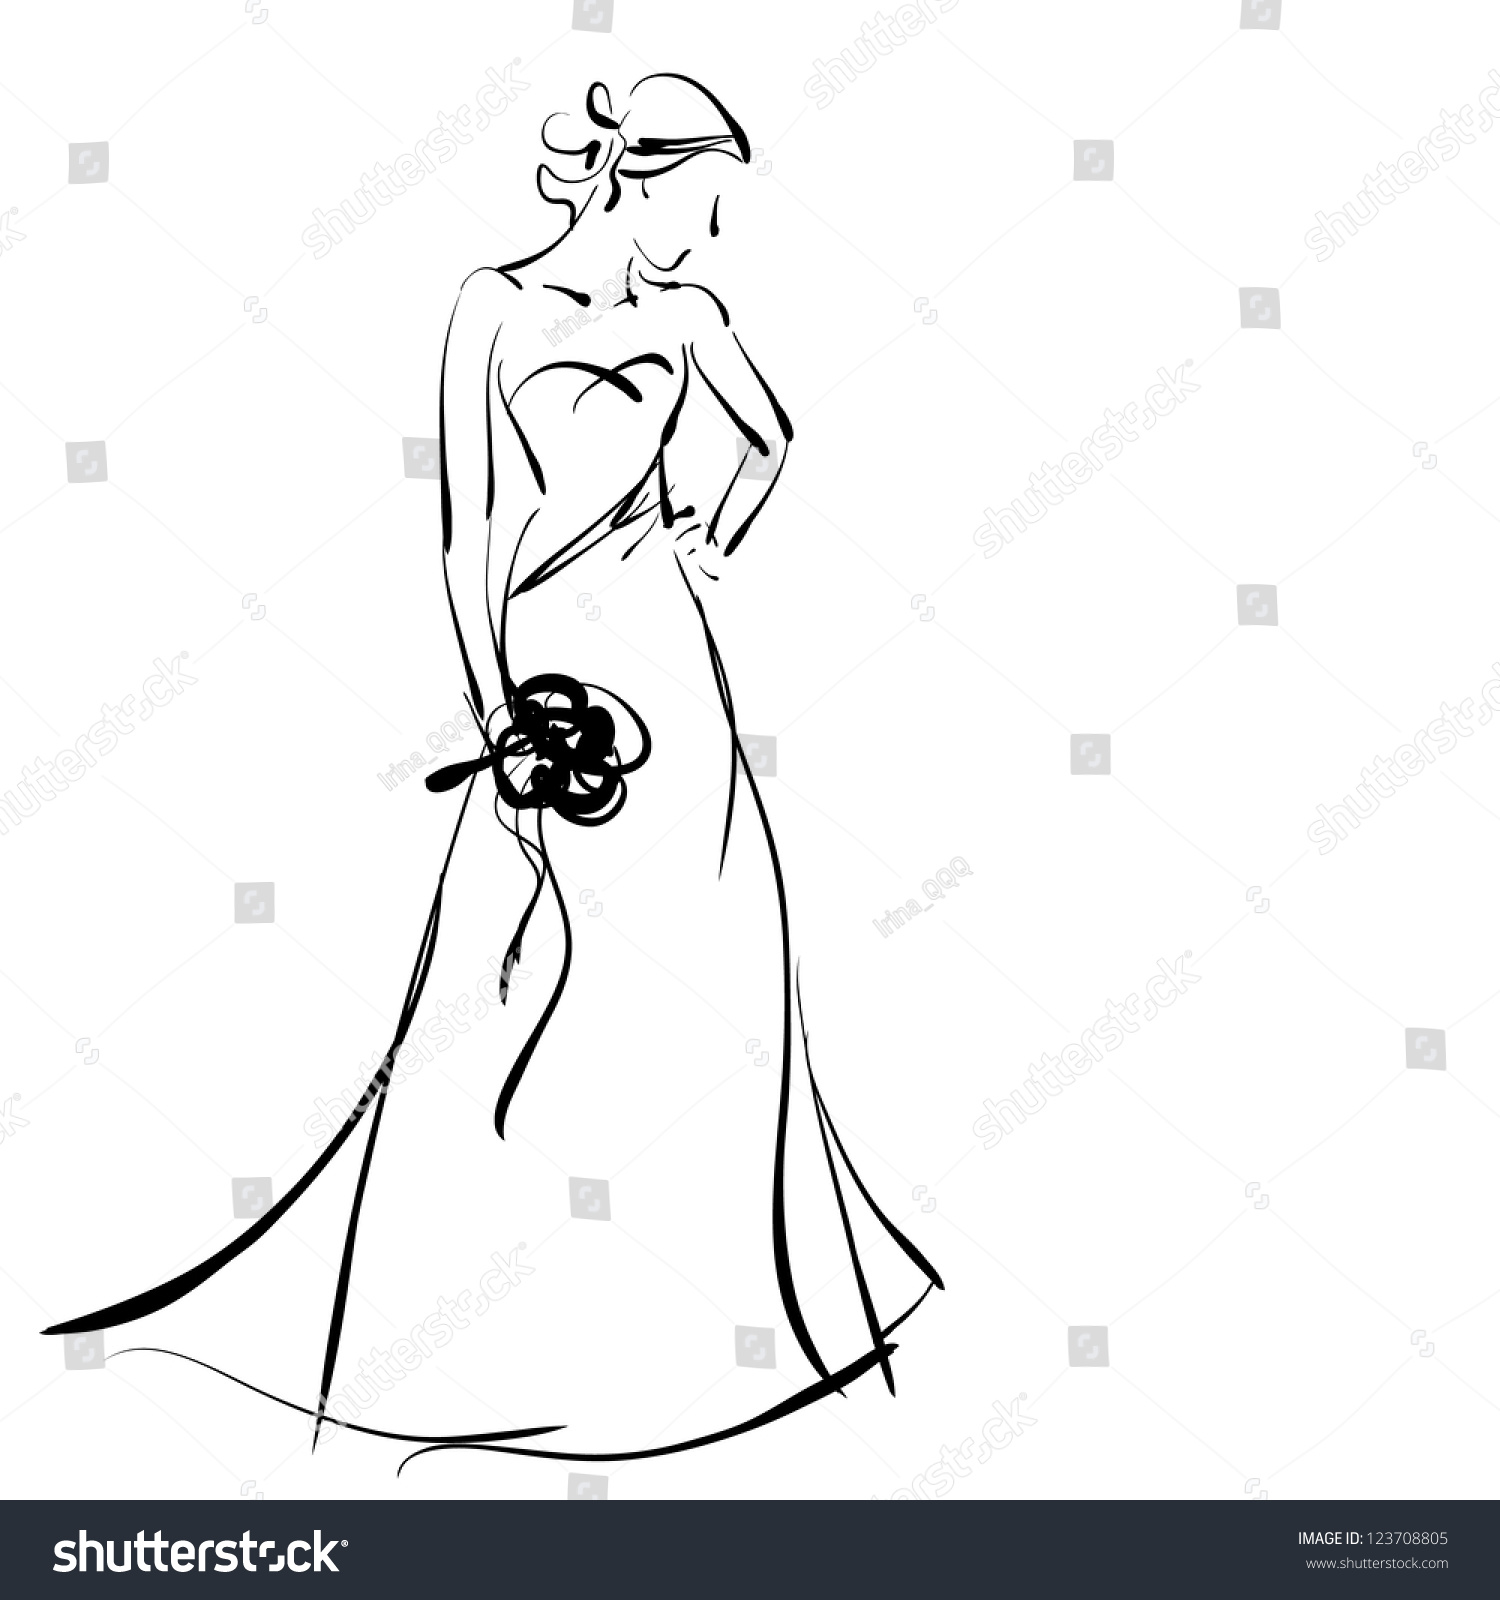 Art Sketching Beautiful Young Bride With The Bride'S Bouquet. Vector ...